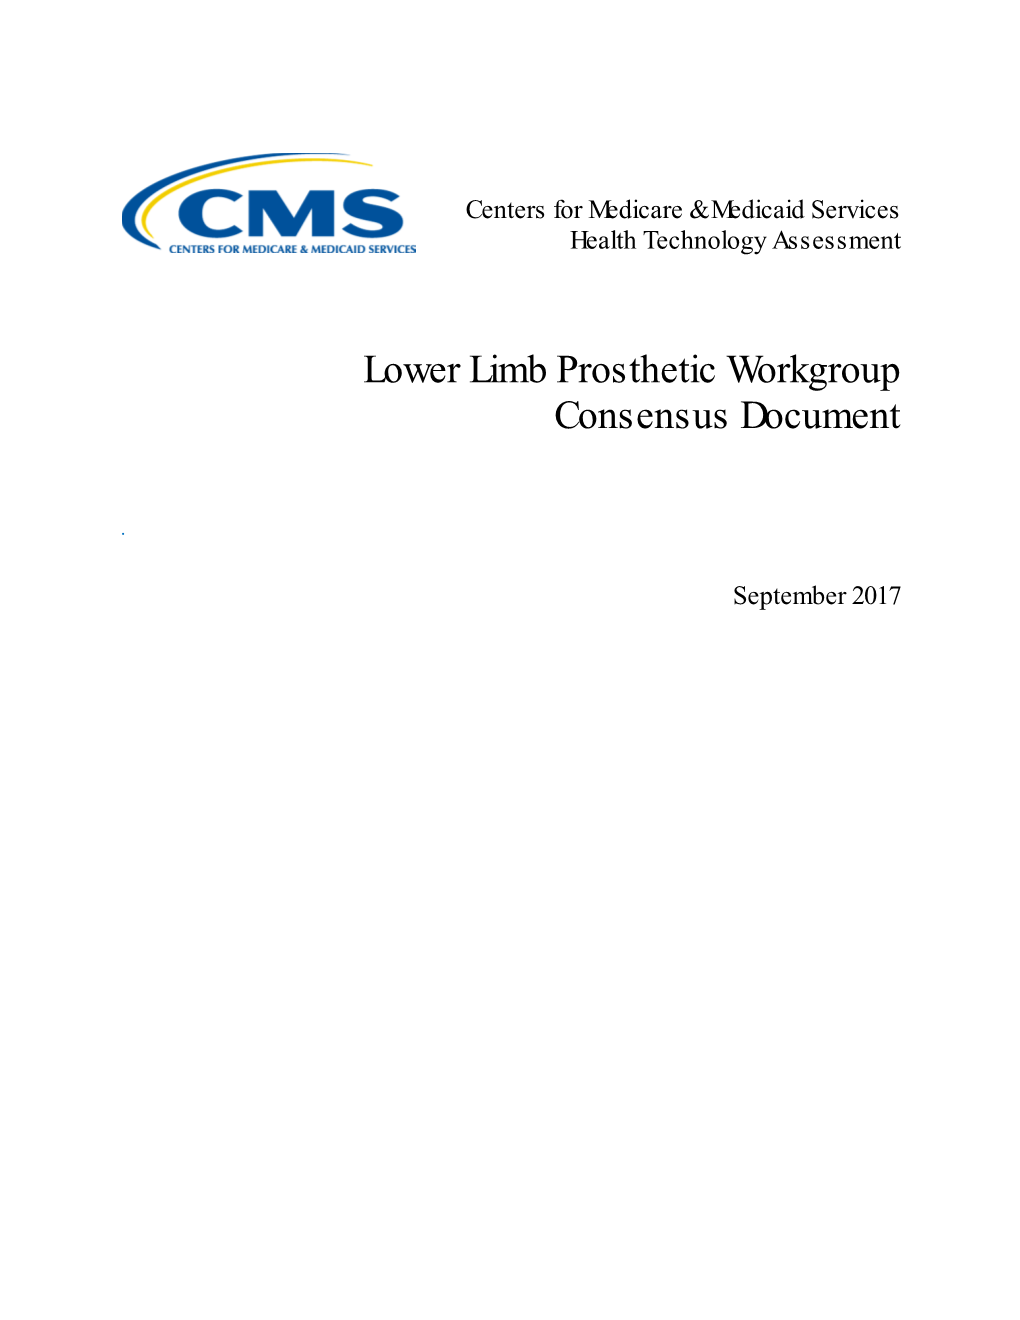 Lower Limb Prosthetic Workgroup Consensus Document